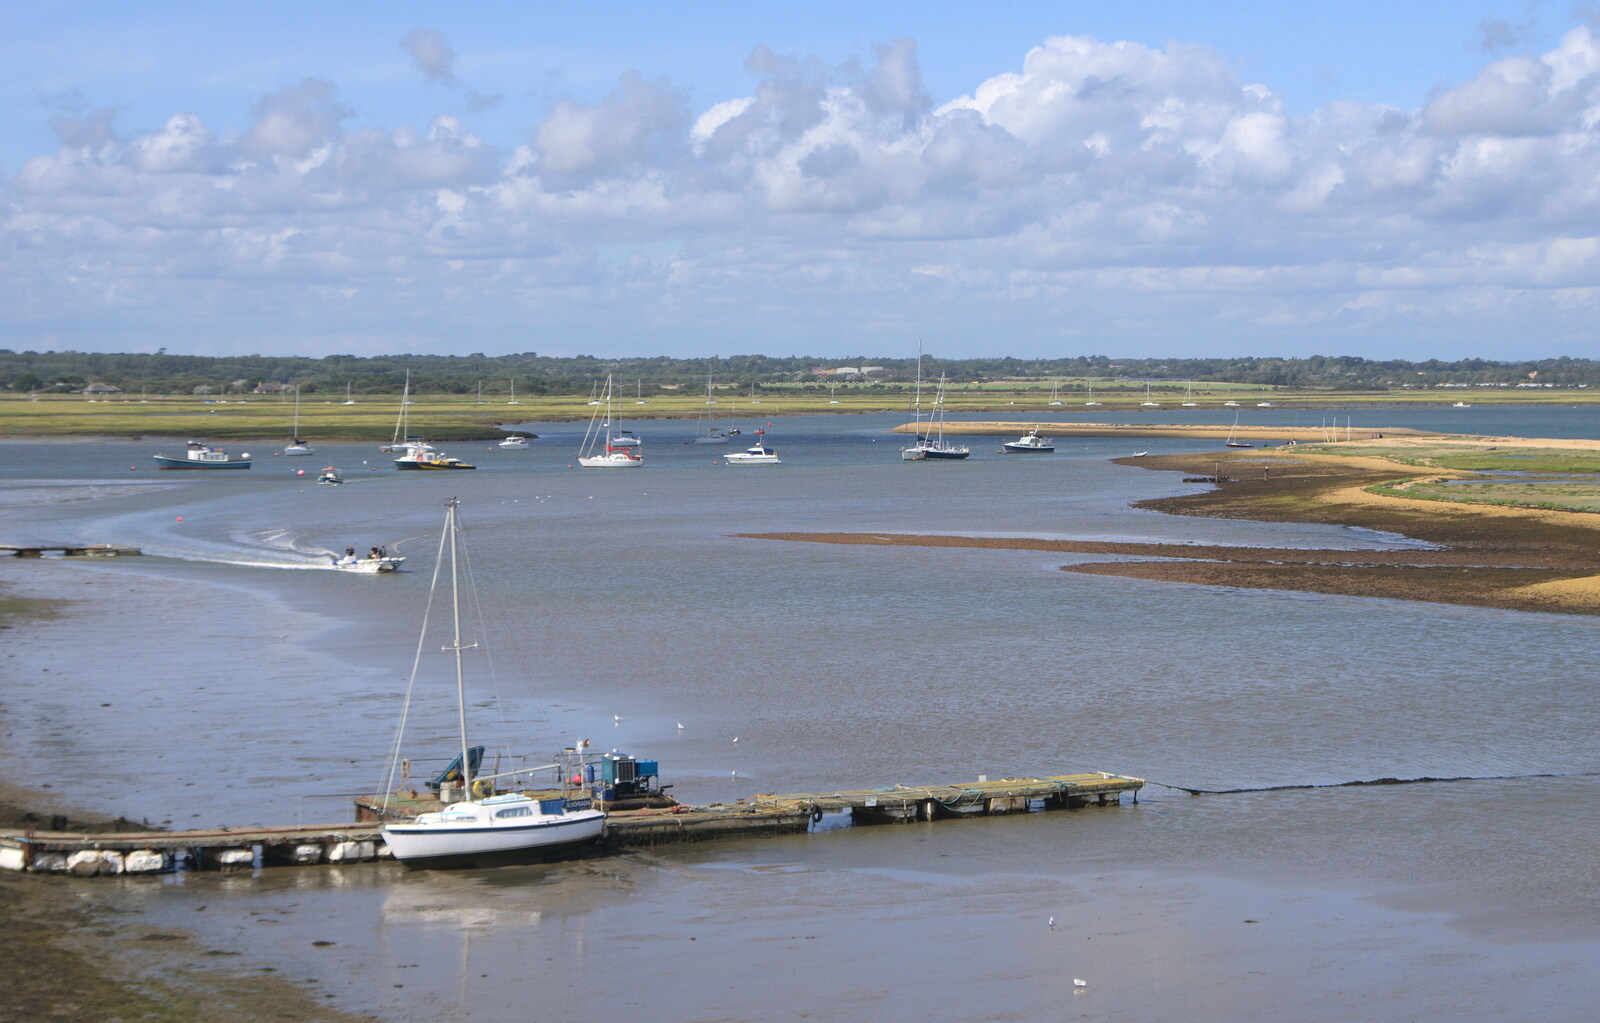 Another view over the river from A Trip to Hurst Castle, Keyhaven, Hampshire - 28th August 2015